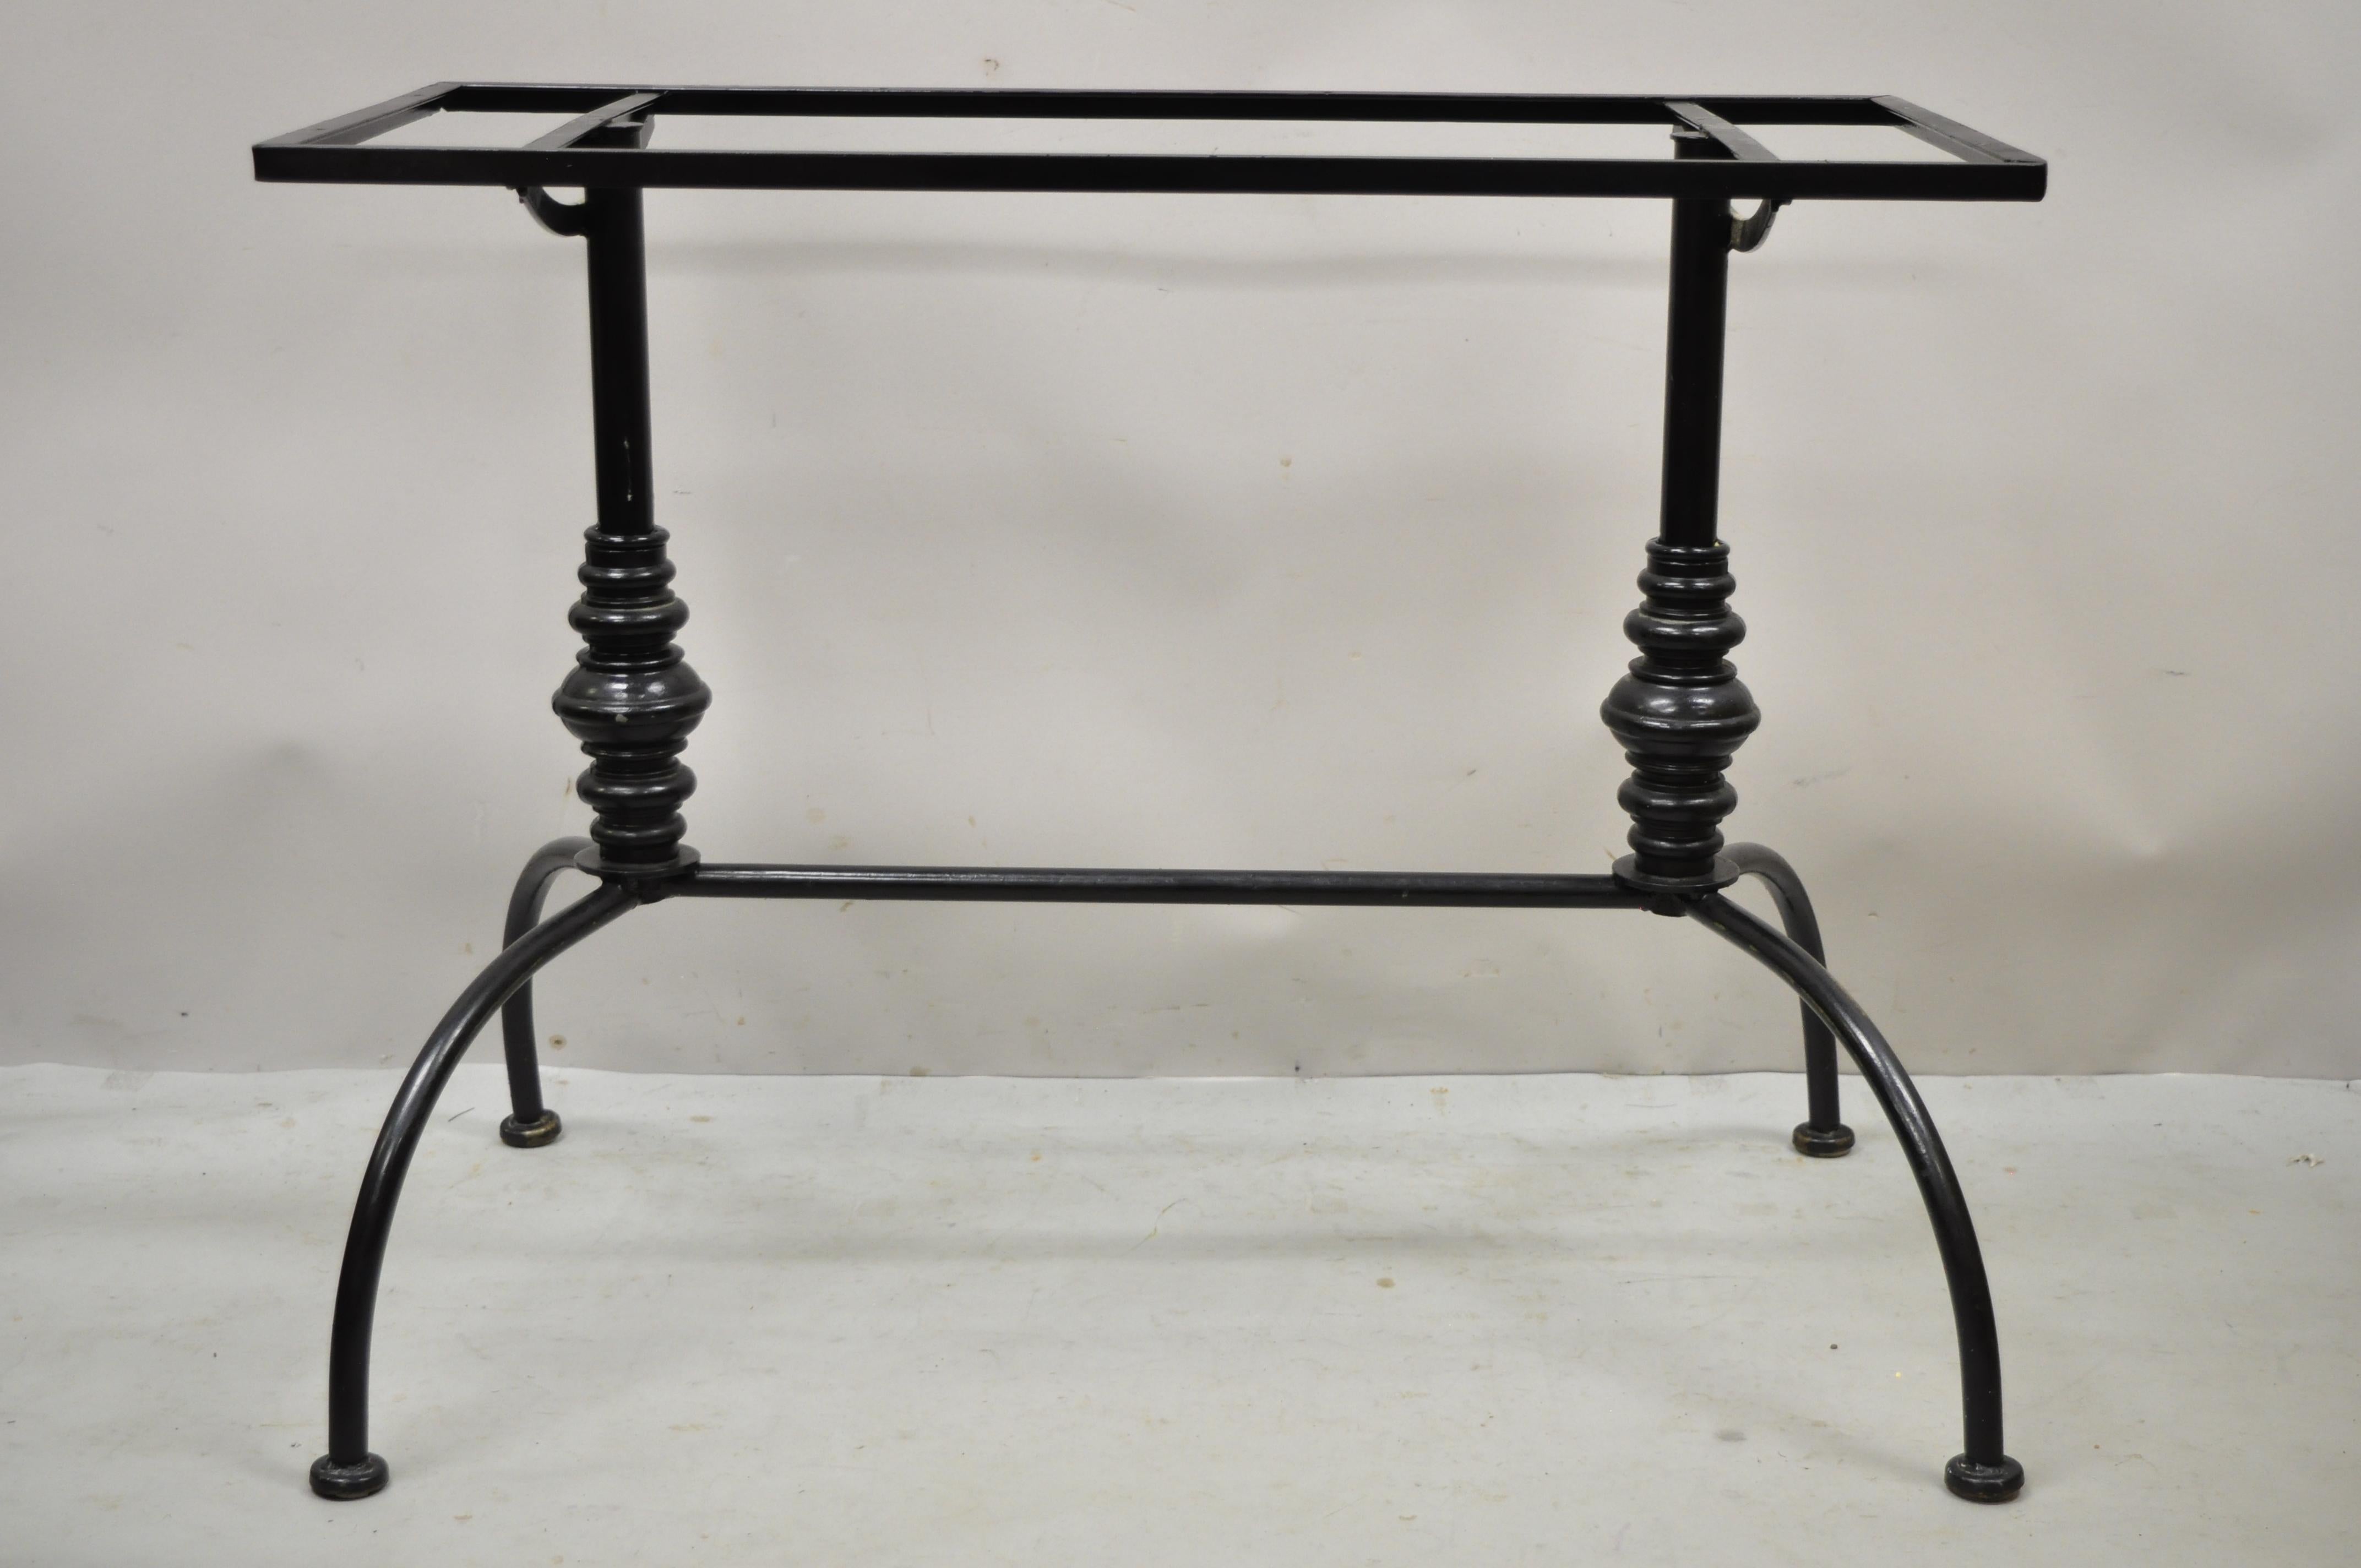 Vintage Gallo French Style Black Wrought Iron Pastry Dining Table Desk Base. Item features shapely bowed legs, black painted finish, wrought iron construction, very nice vintage item, quality American craftsmanship. Circa Late 20th Century.